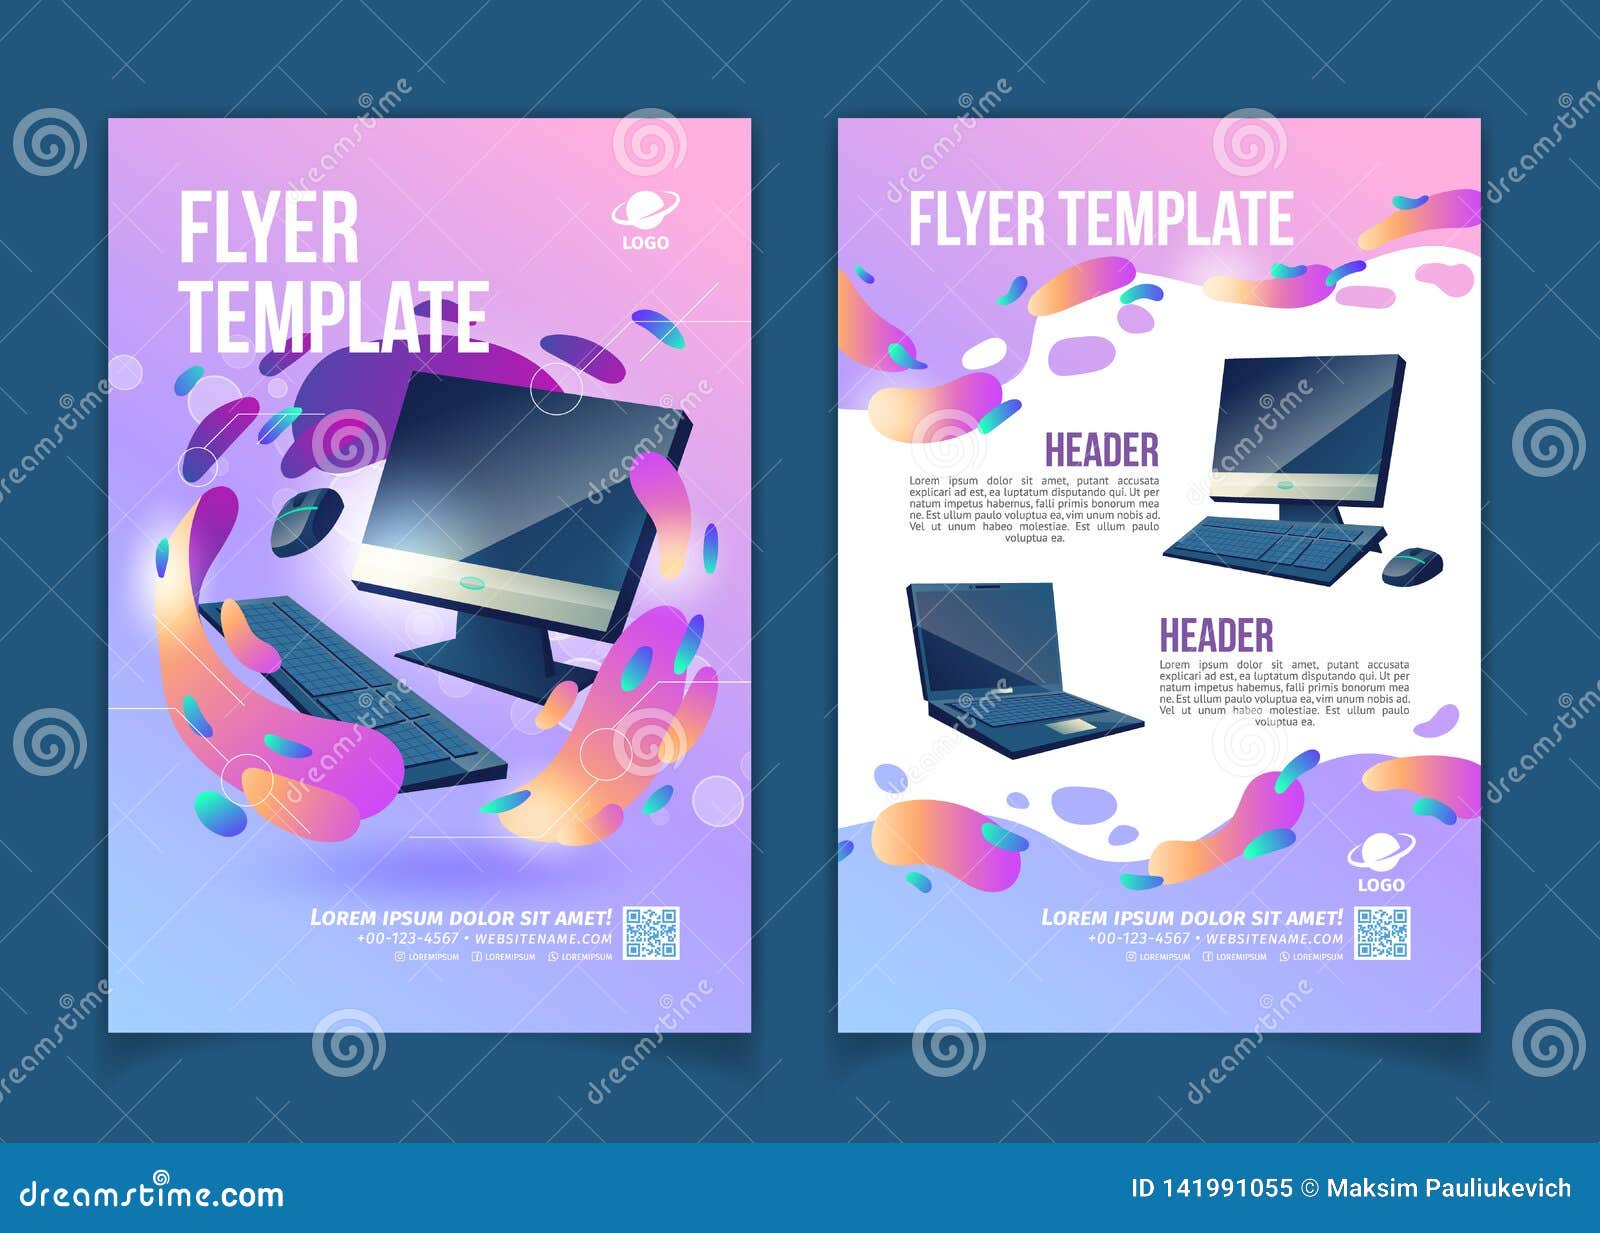 Trading Flyer Stock Illustrations – 23 Trading Flyer Stock With Computer Repair Flyer Word Template